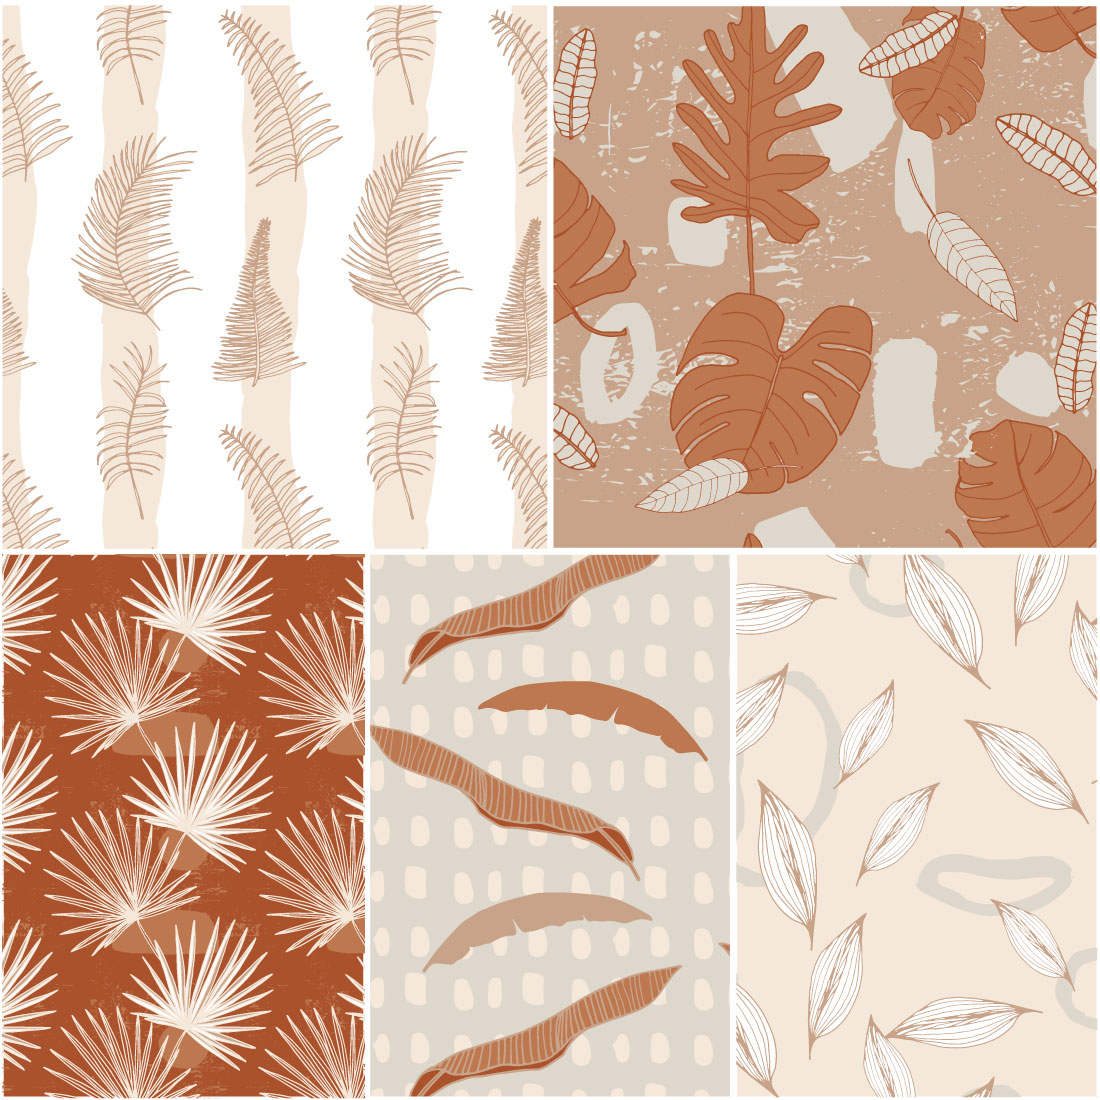 Tropical Jungle Patterns preview image.